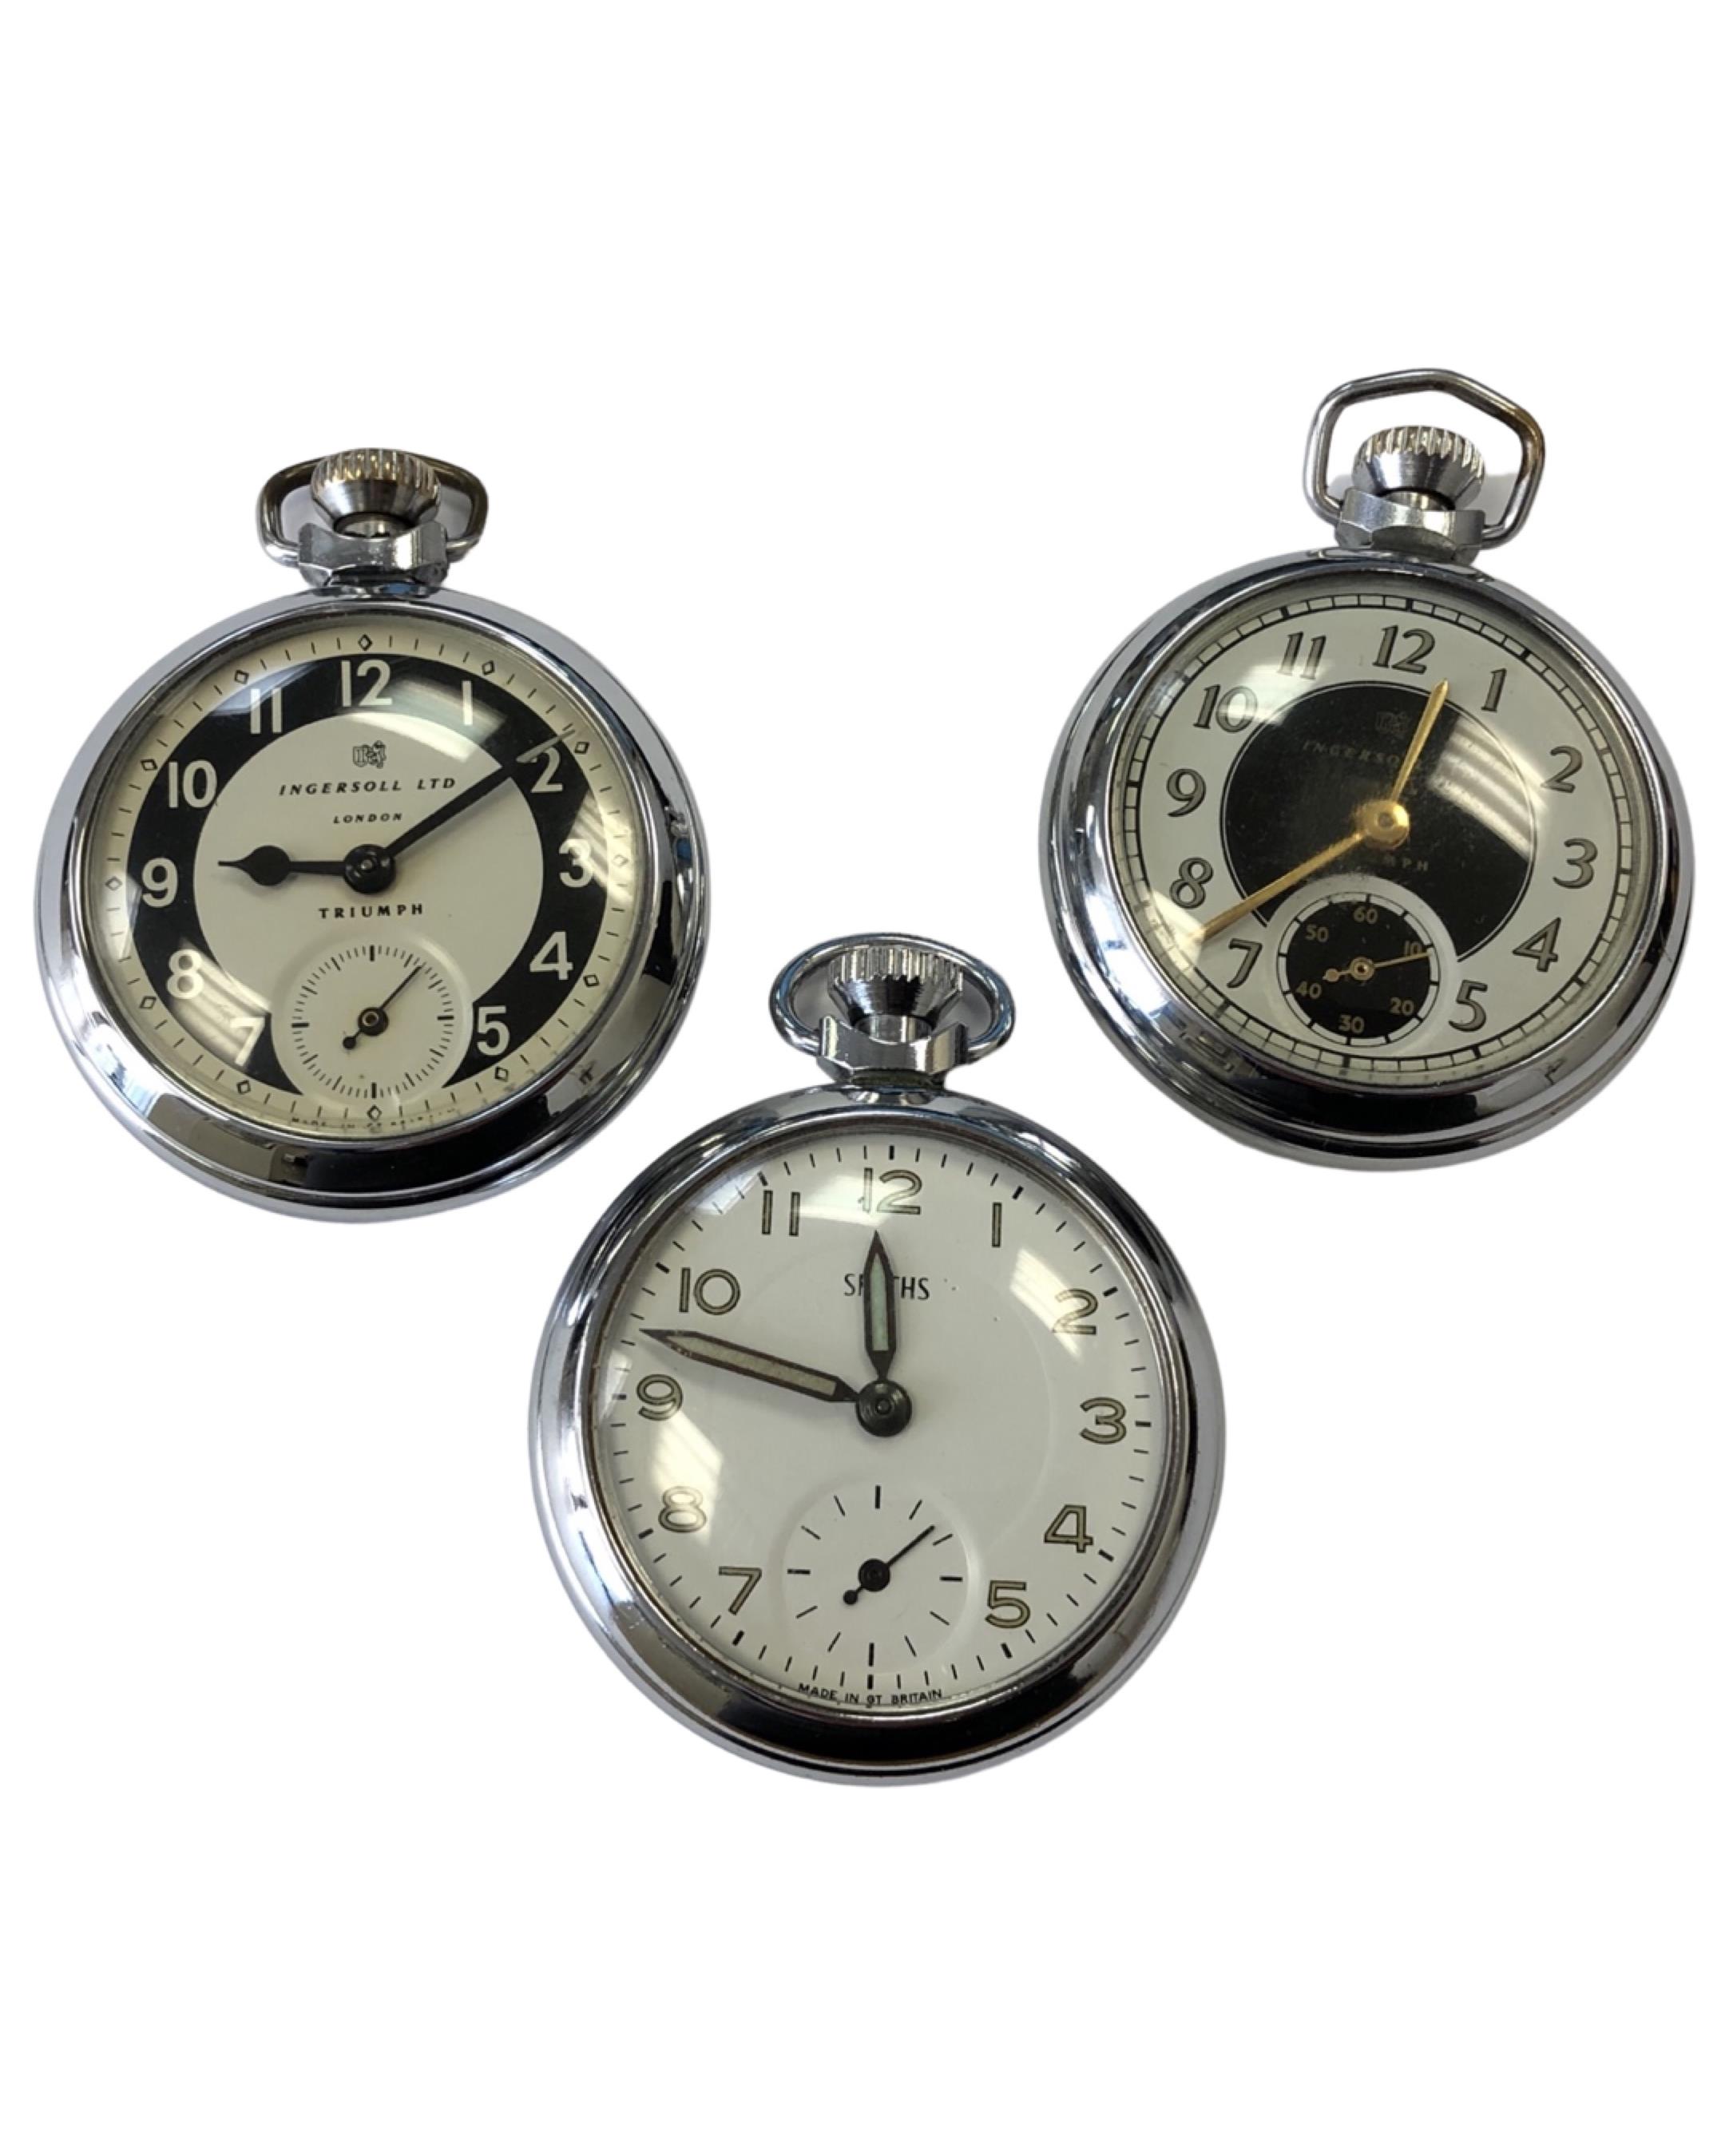 Two Ingersoll pocket watches and a Smiths watch.